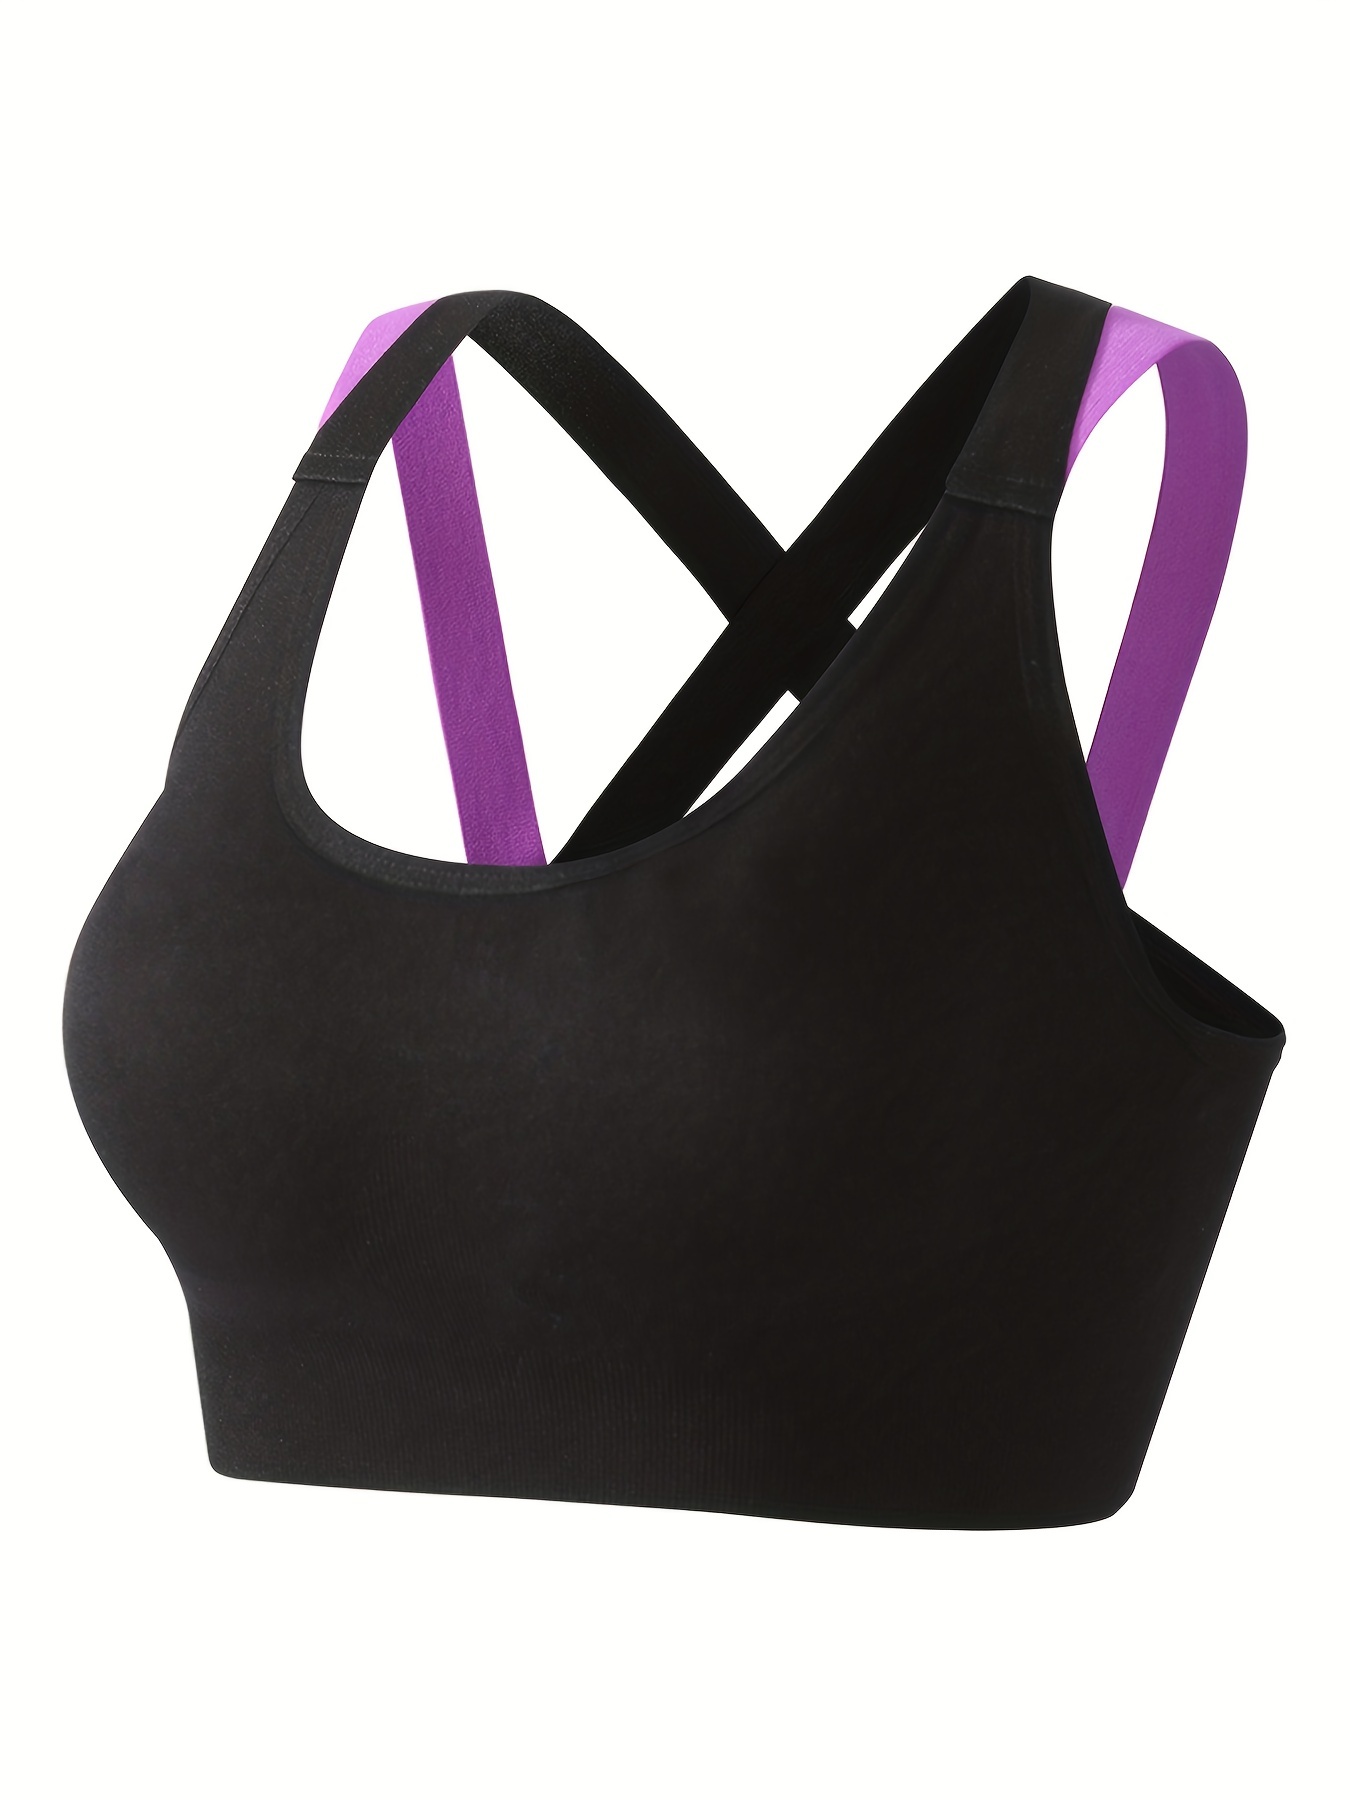 Breathable Sports Bra Bras Padded Womens Running Gym Fitness